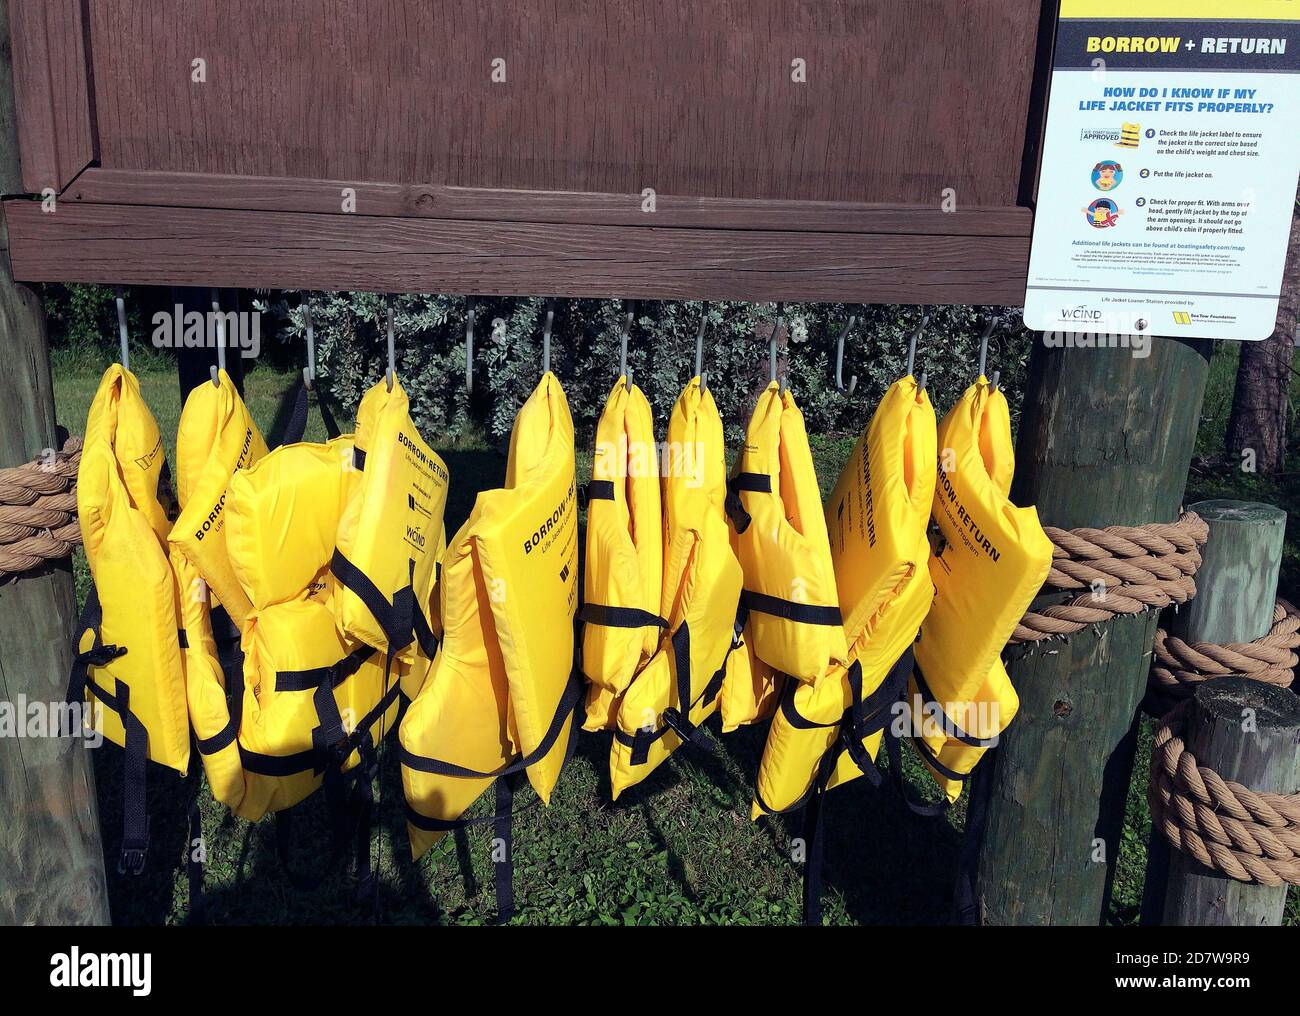 A row of bright yellow life jackets awaits boaters who have forgotten to bring a personal flotation device that helps ensure their safety at sea in the Gulf of Mexico along the west coast of Florida, USA. The buoyant vests are offered free of charge as part of a Borrow and Return program by the Sea Tow Foundation and the West Coast Inland Navigation District (WCIND). Loaner life preservers are available to prevent drownings in many places in the United States and other countries where recreation on the water is popular. Stock Photo